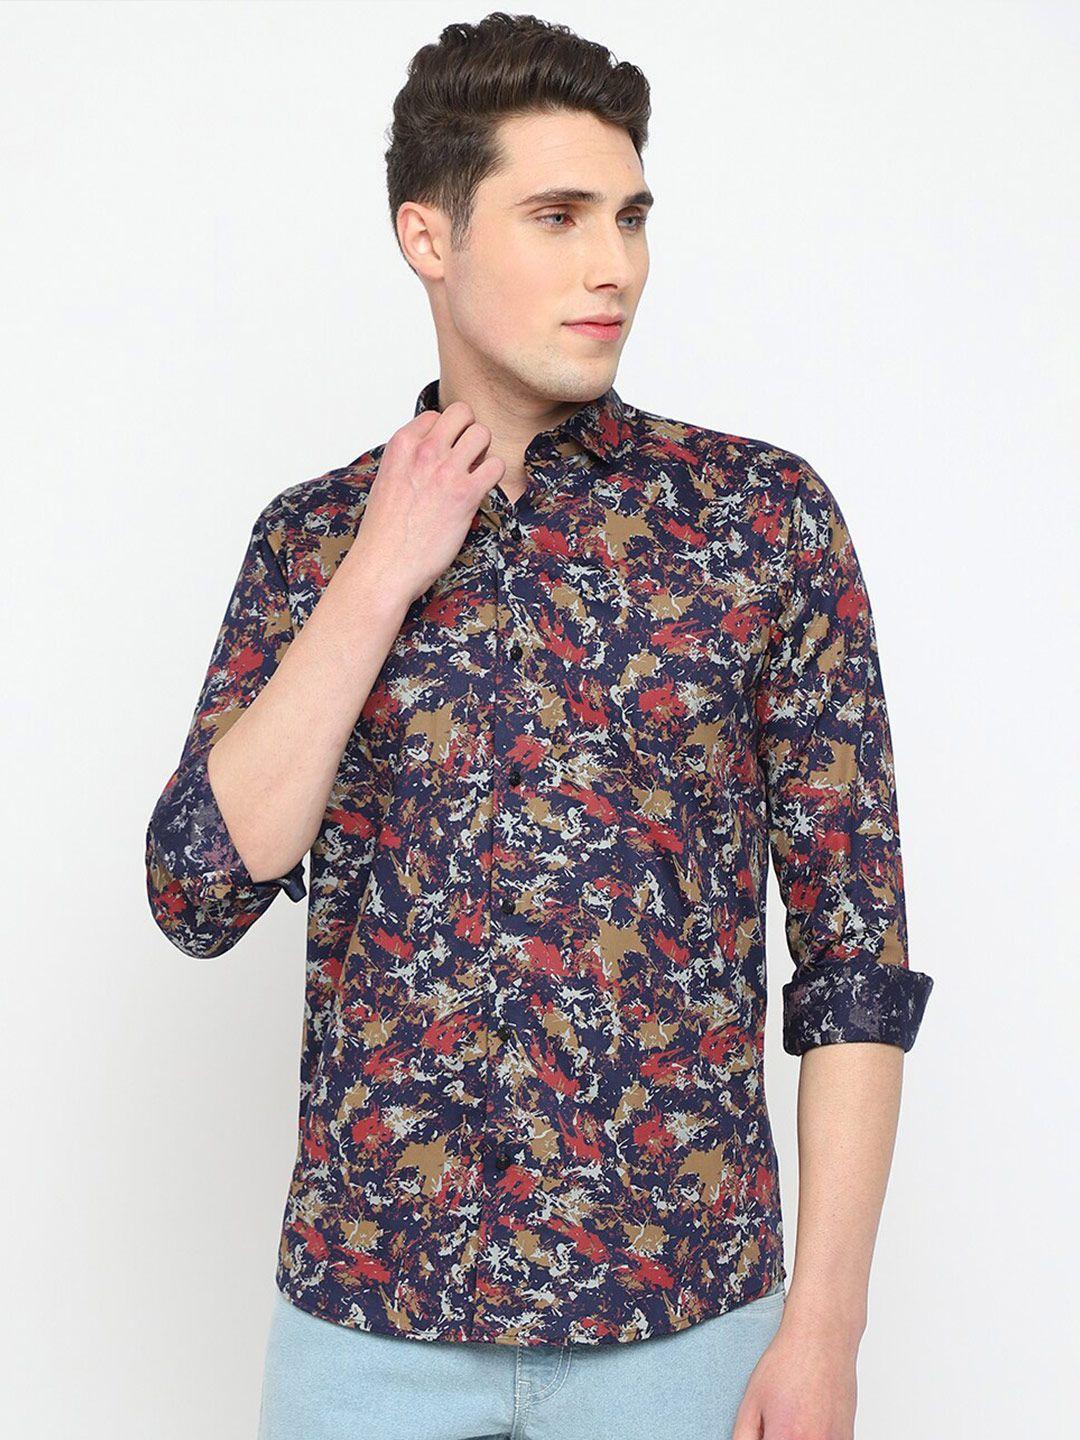 jadeberry-classic-floral-printed-cotton-shirt